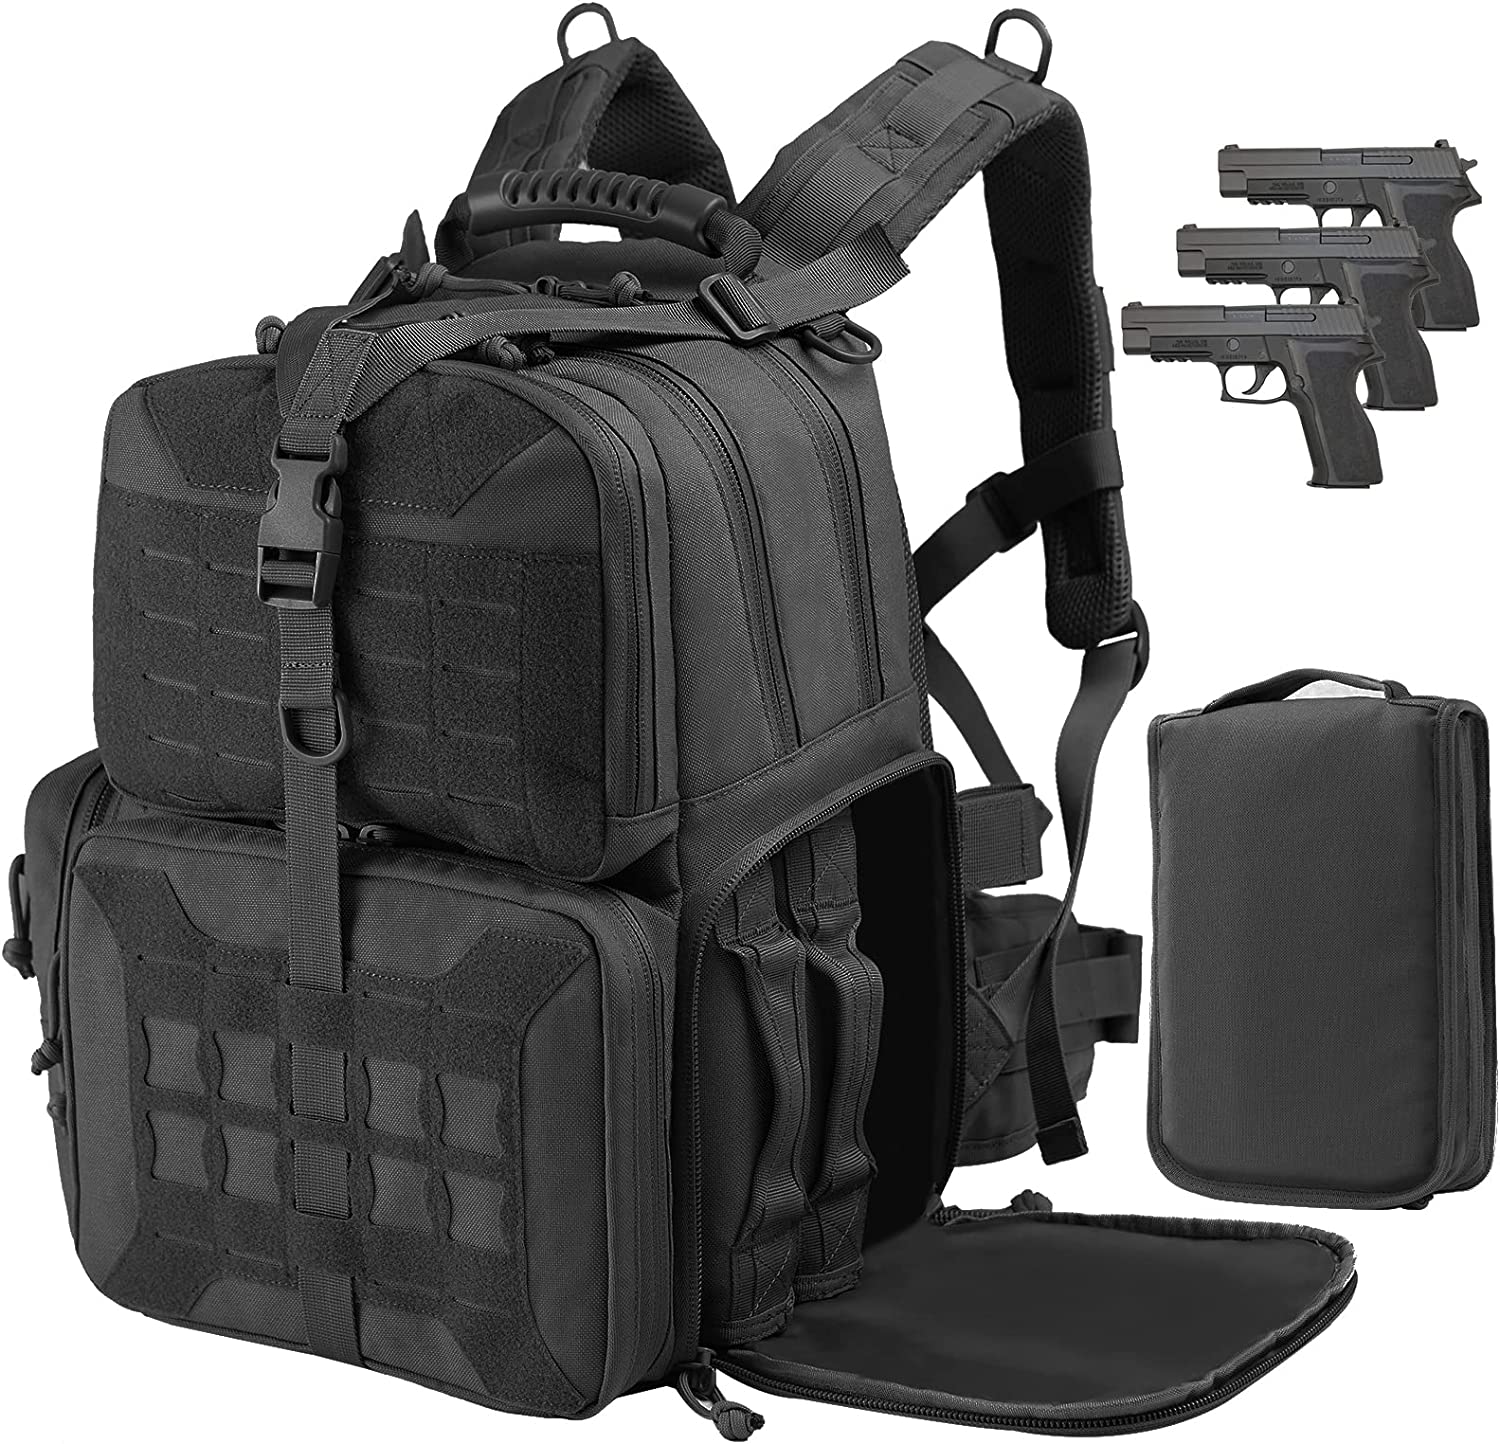  Military Matter Tactical Range Backpack Bag, VOTAGOO Range Activity Bag For Handgun And Ammo, 3 Pistol Carrying Case For Hunting Shooting | The Best CS Tactical Clothing Store